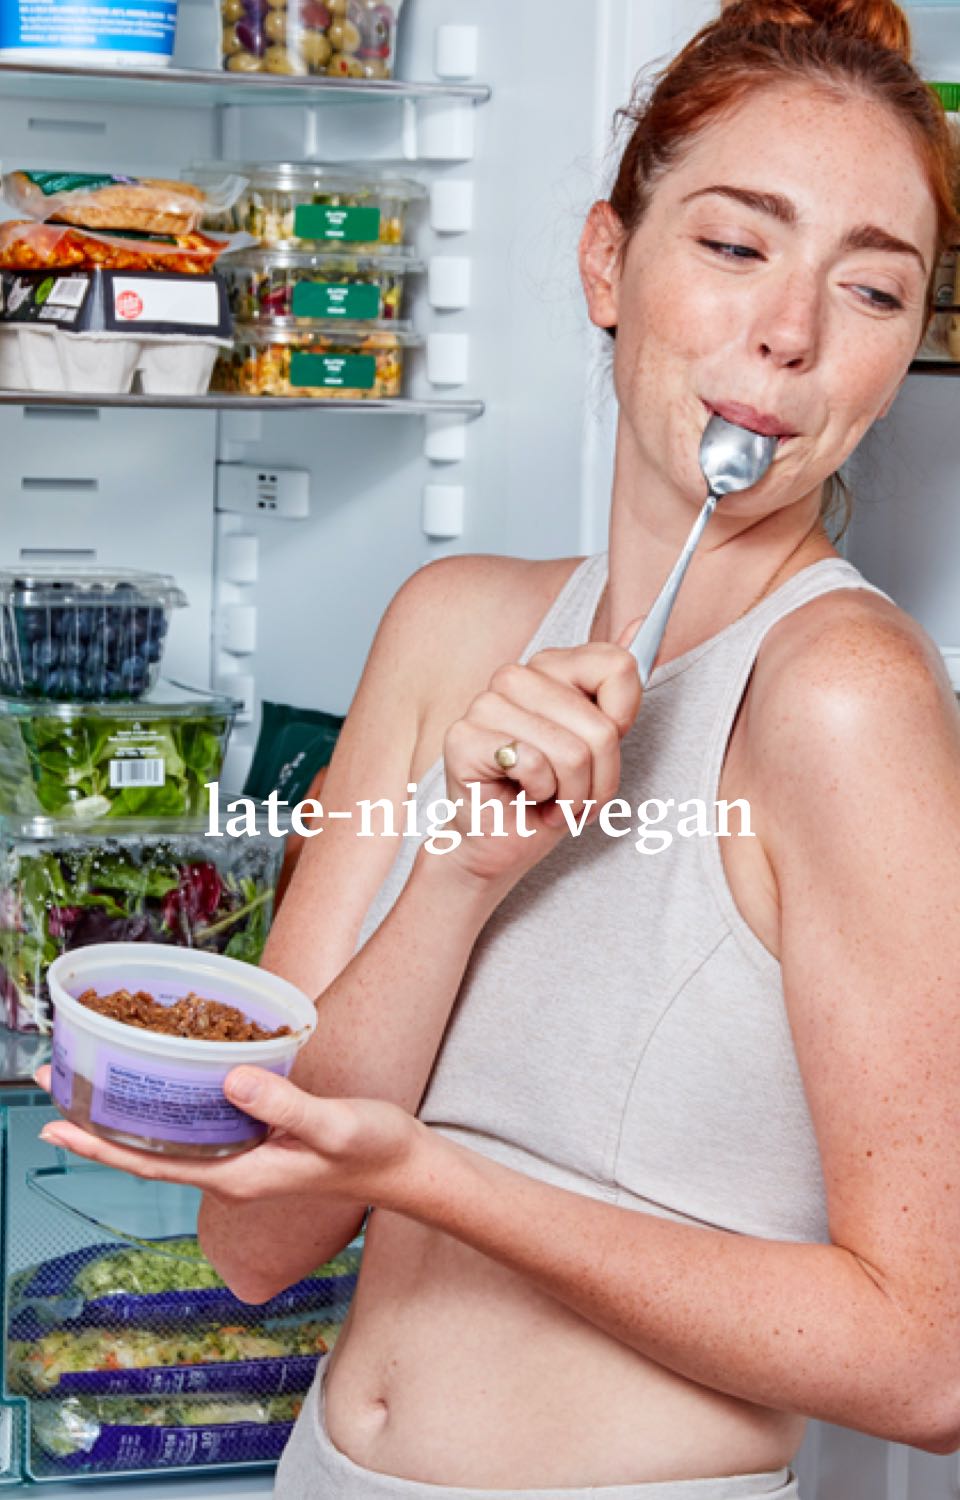 Woman in front of an open refrigerator eating from a container with a spoon in her mouth. Headline reads Late-night Vegan